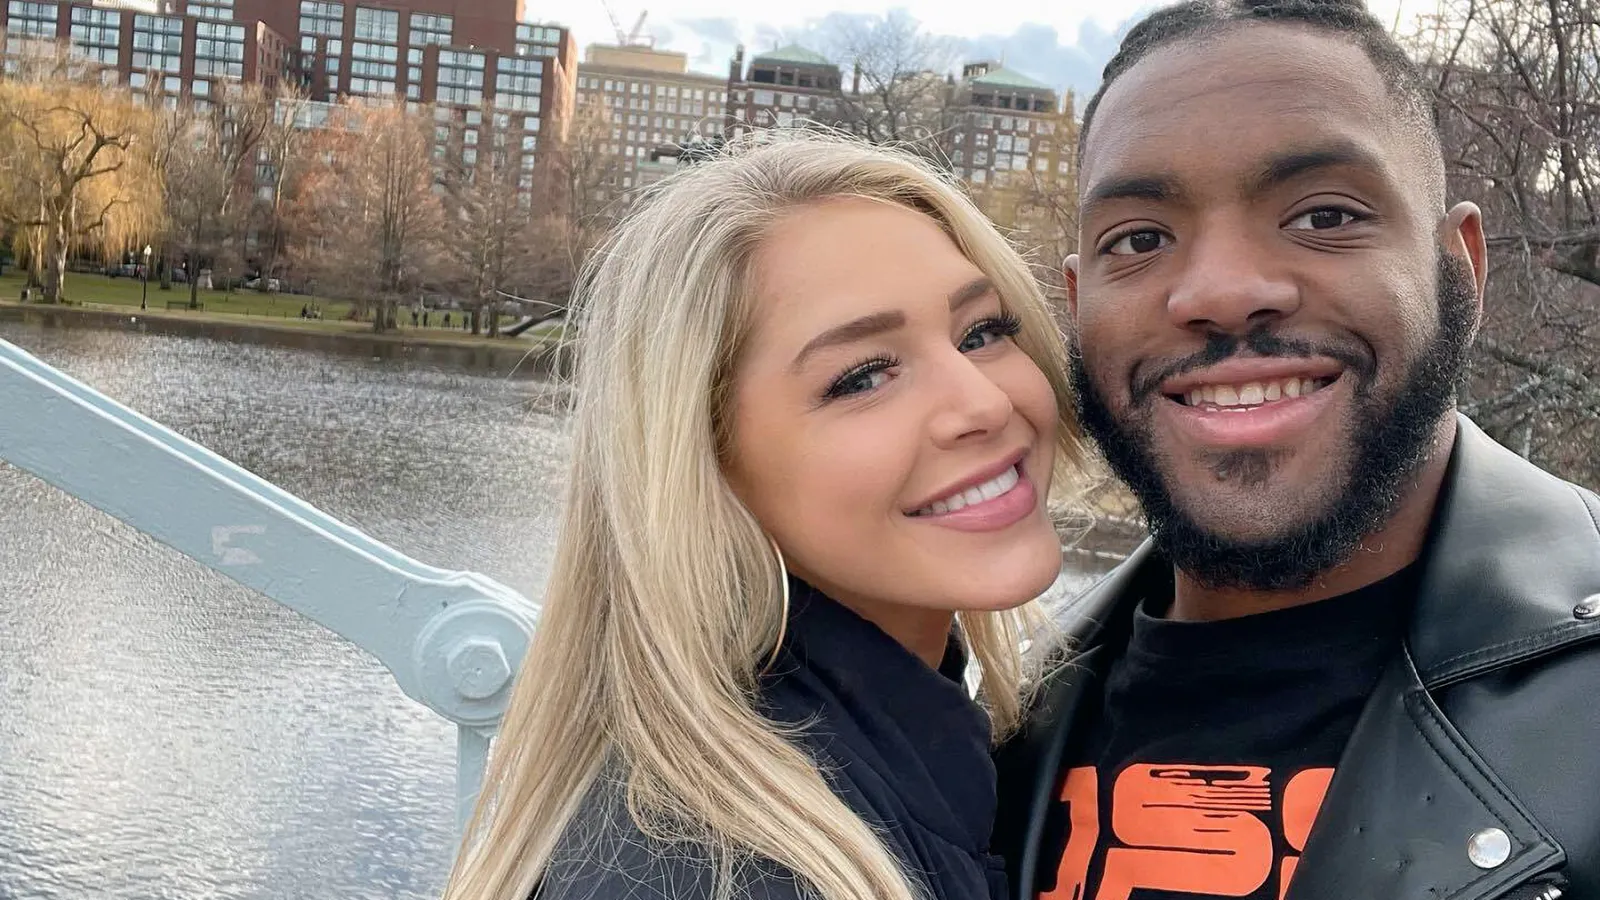 Courtney Clenney’s Parents Reveal Her Fear Of Boyfriend’s Intentions